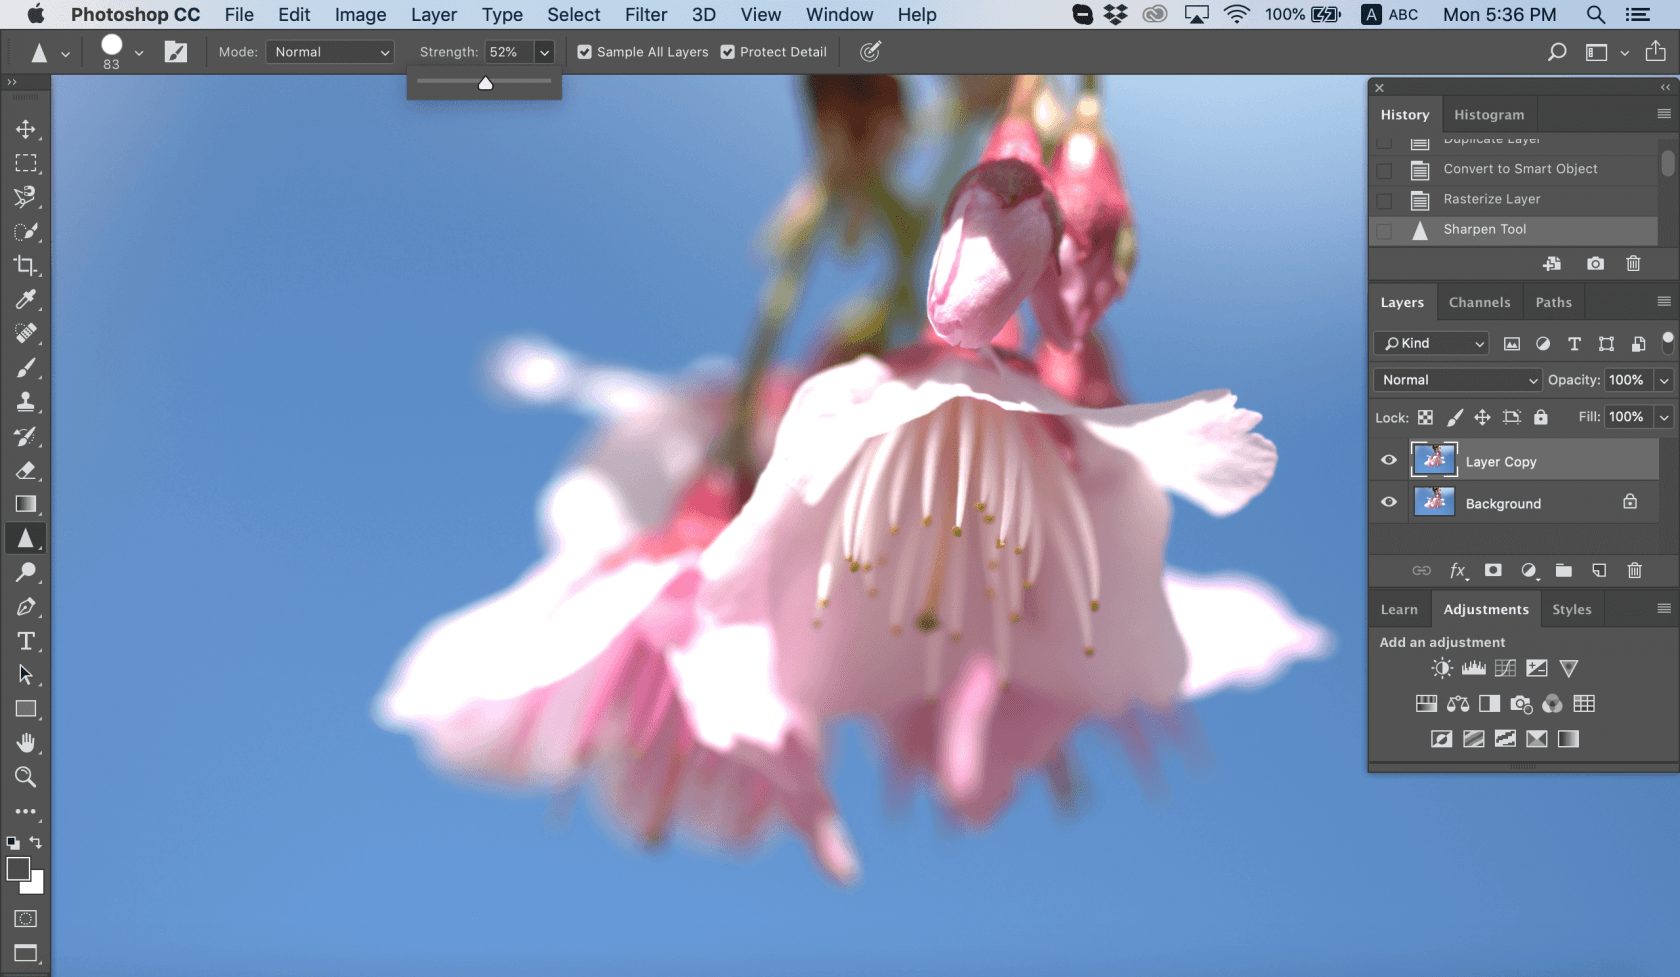 How to Sharpen an Image in Photoshop Image13